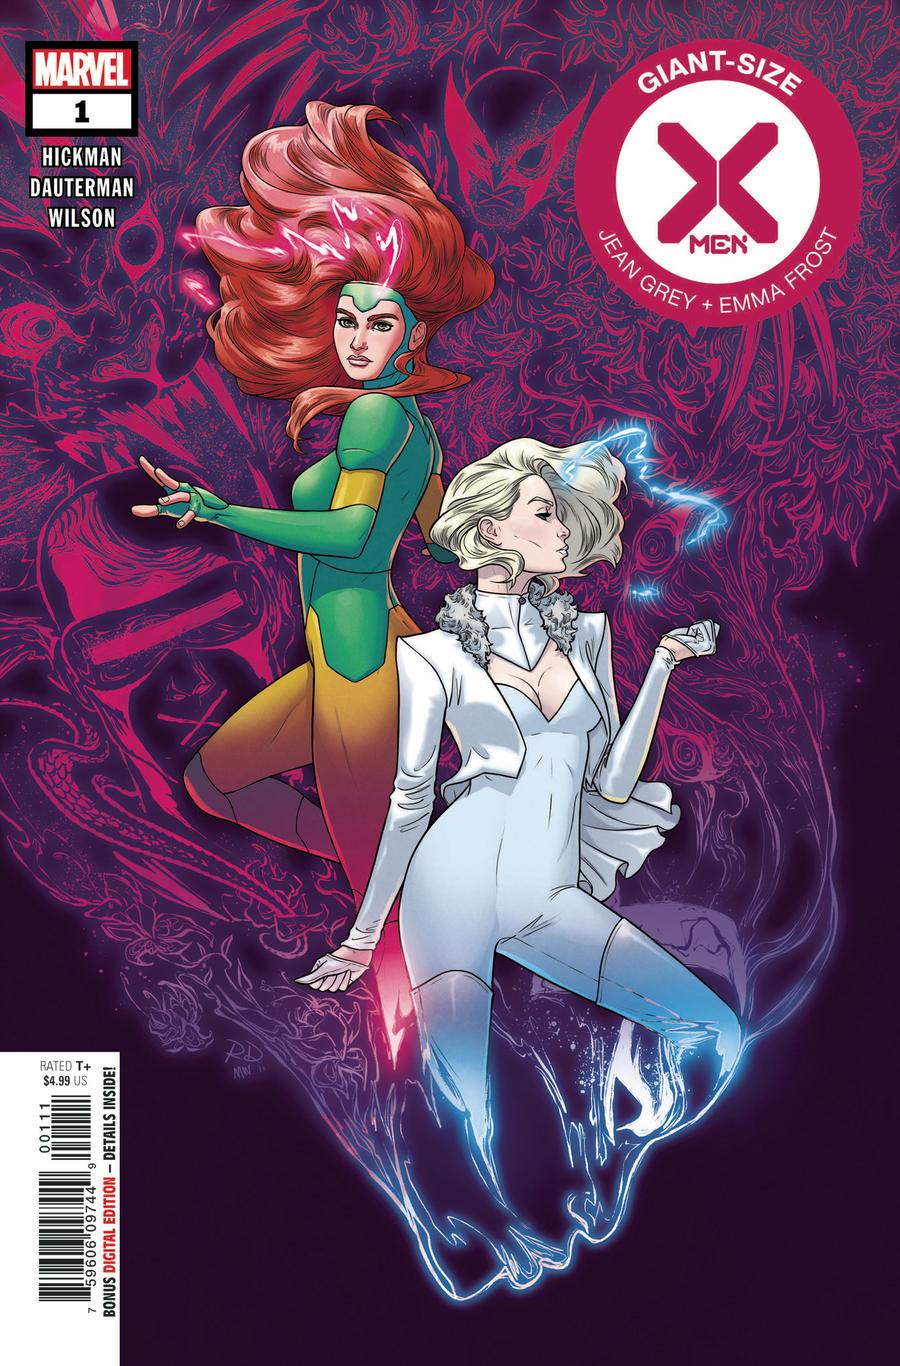 Giant-Size X-Men Jean Grey & Emma Frost #1 Cover A Regular Russell Dauterman Cover (Dawn Of X Tie-In)